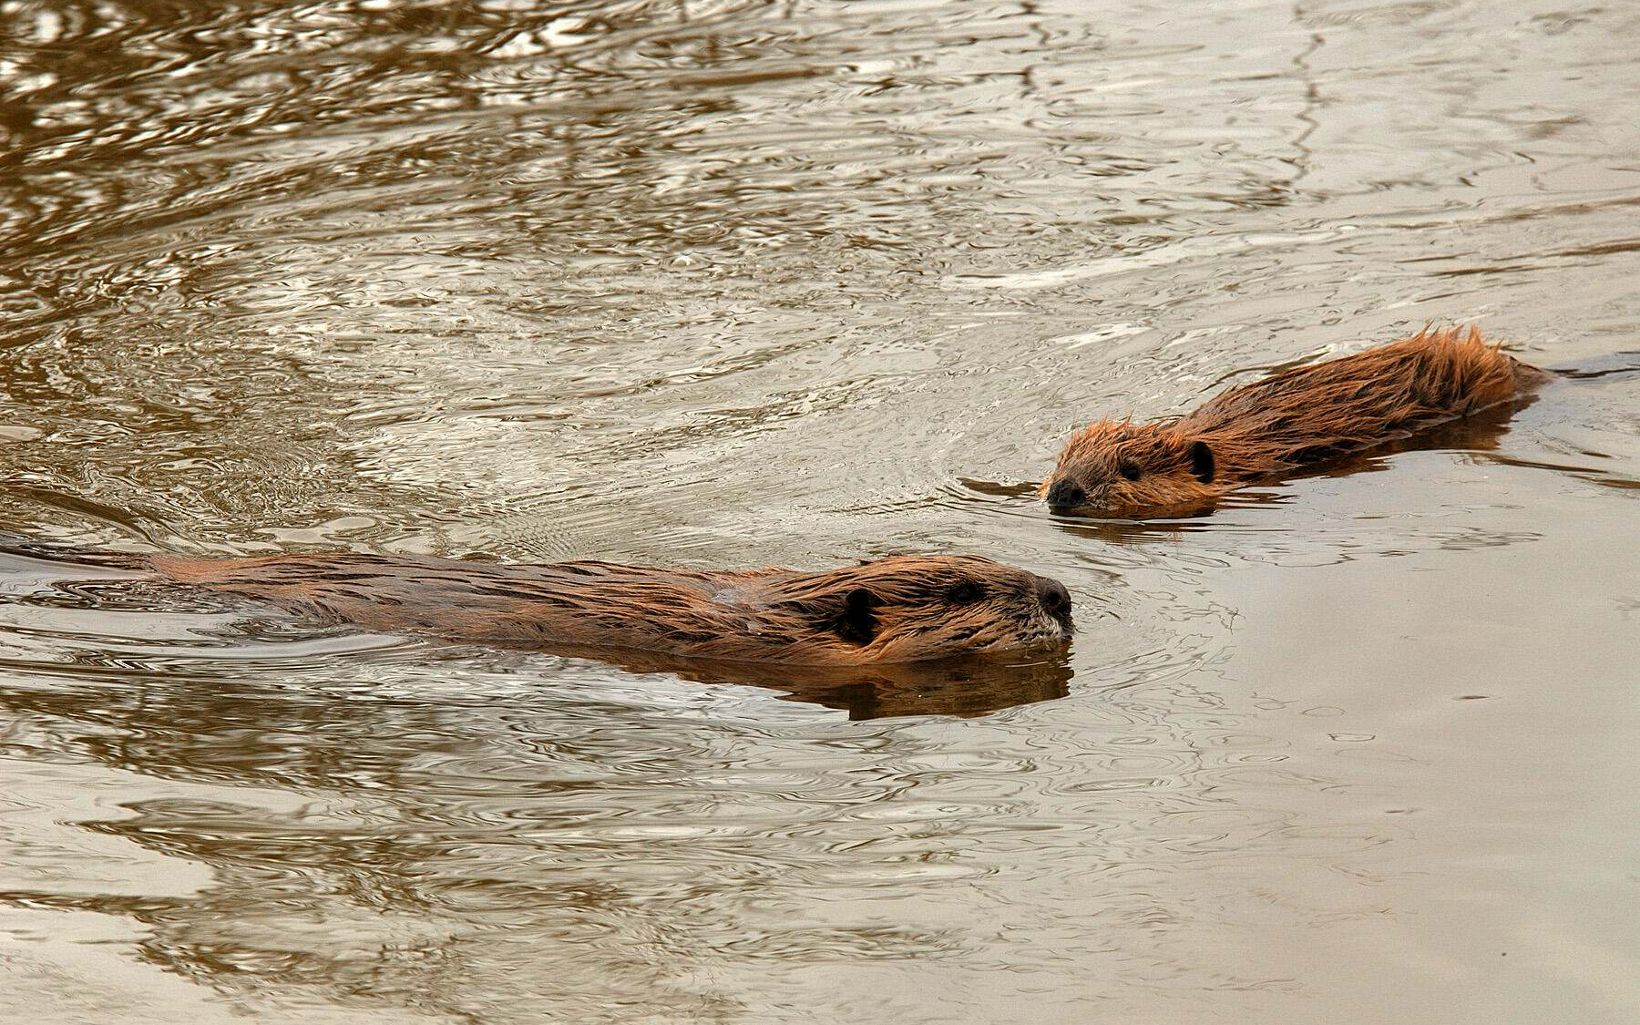 American Beaver The largest rodent in North America, beavers are found in forested ponds, lakes, and rivers in the eastern and western parts of Ohio. ©  Ken Driese